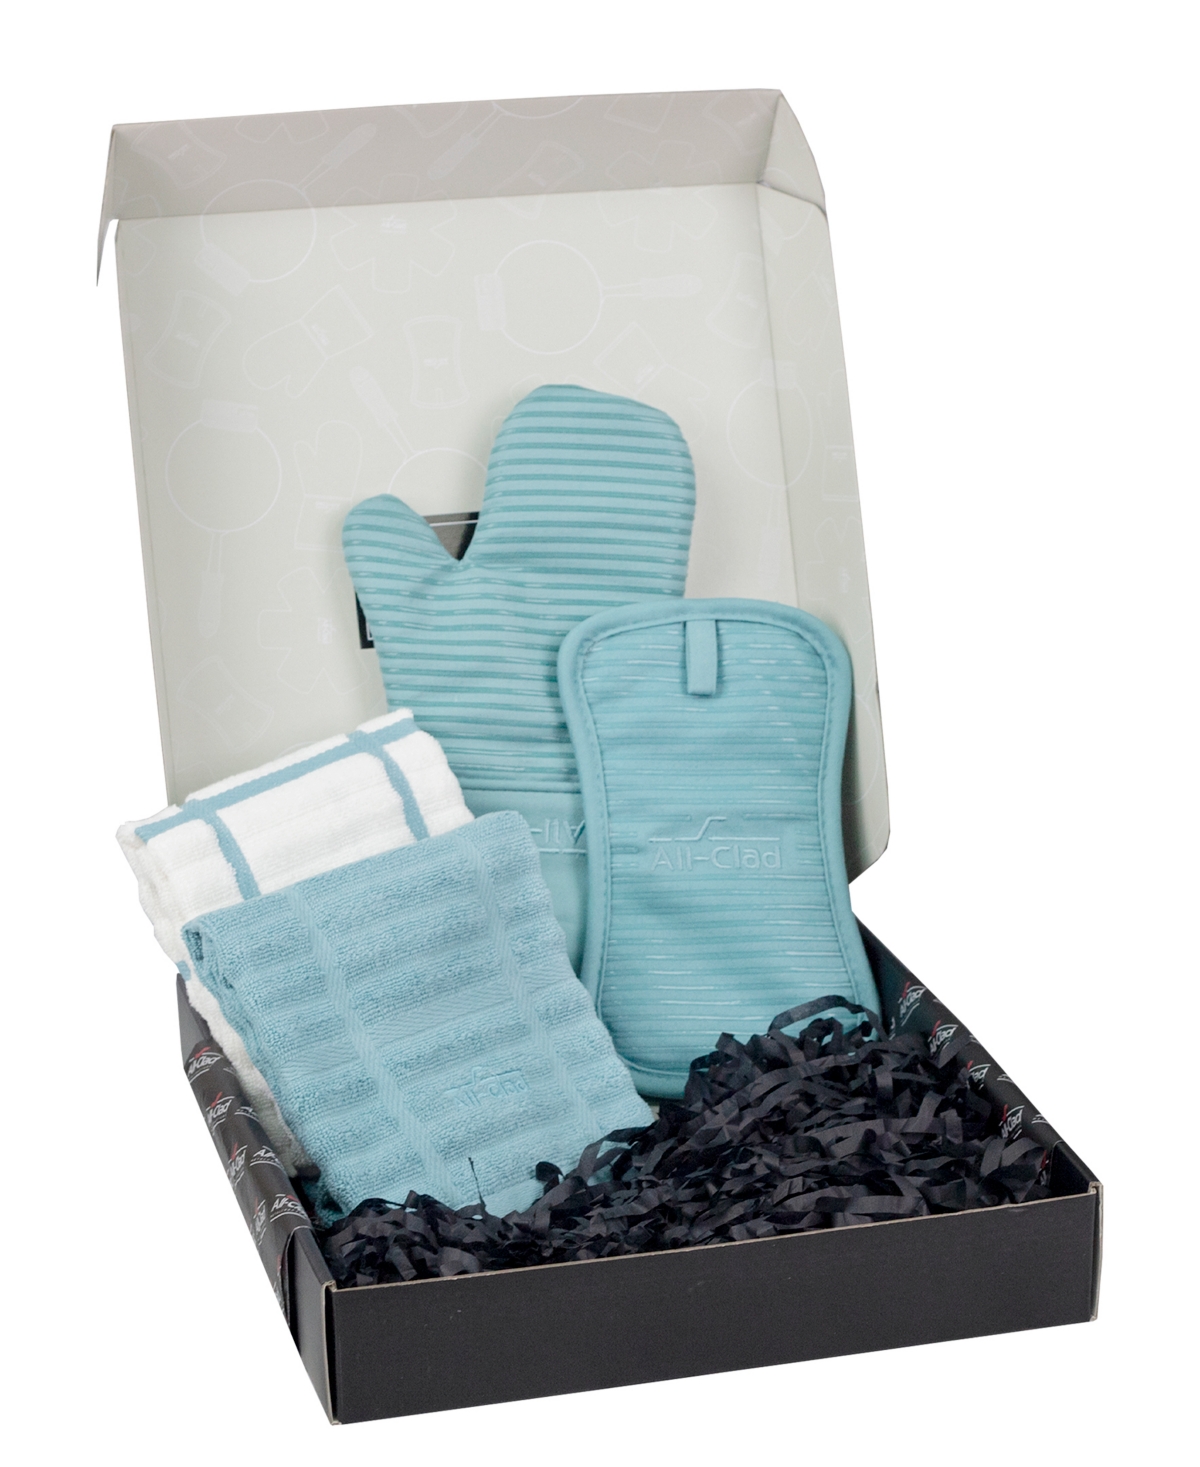 Foundation Collection 4-Piece Gift Set - Rainfall